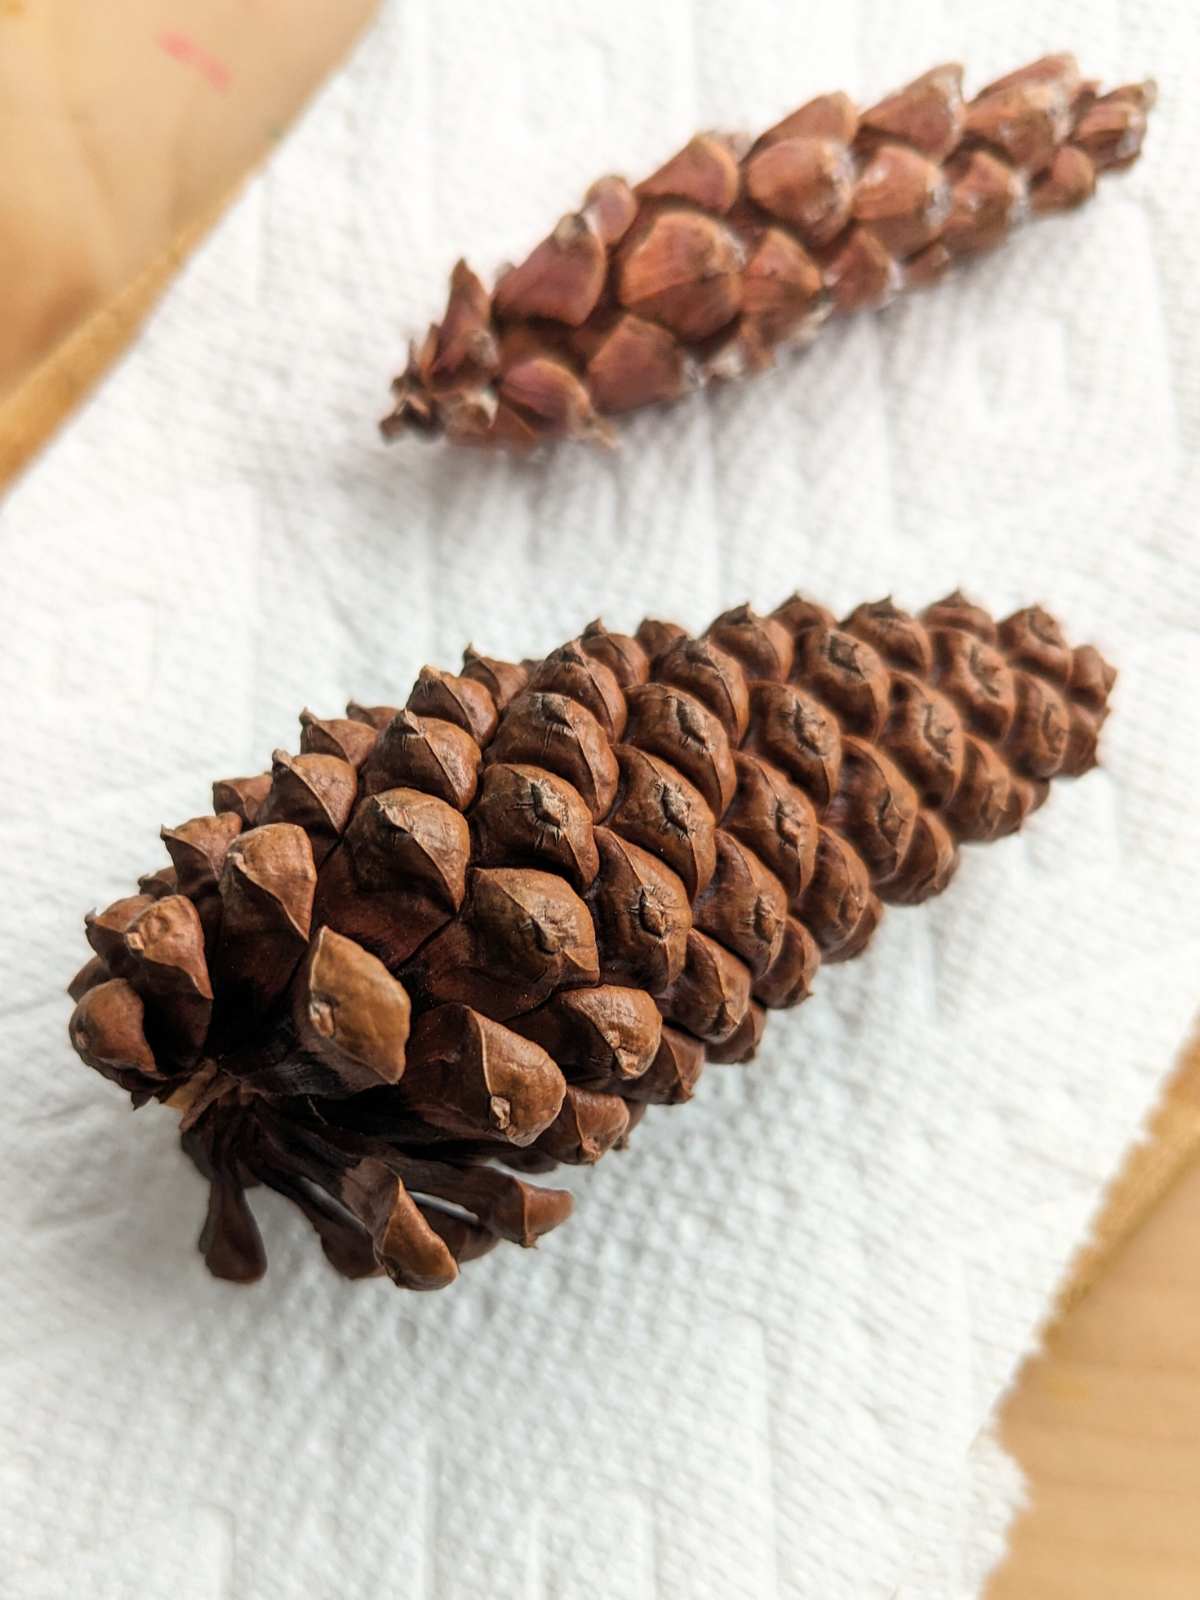 Two mostly closed pinecones on a paper towel with a wooden surface upper left and bottom right.